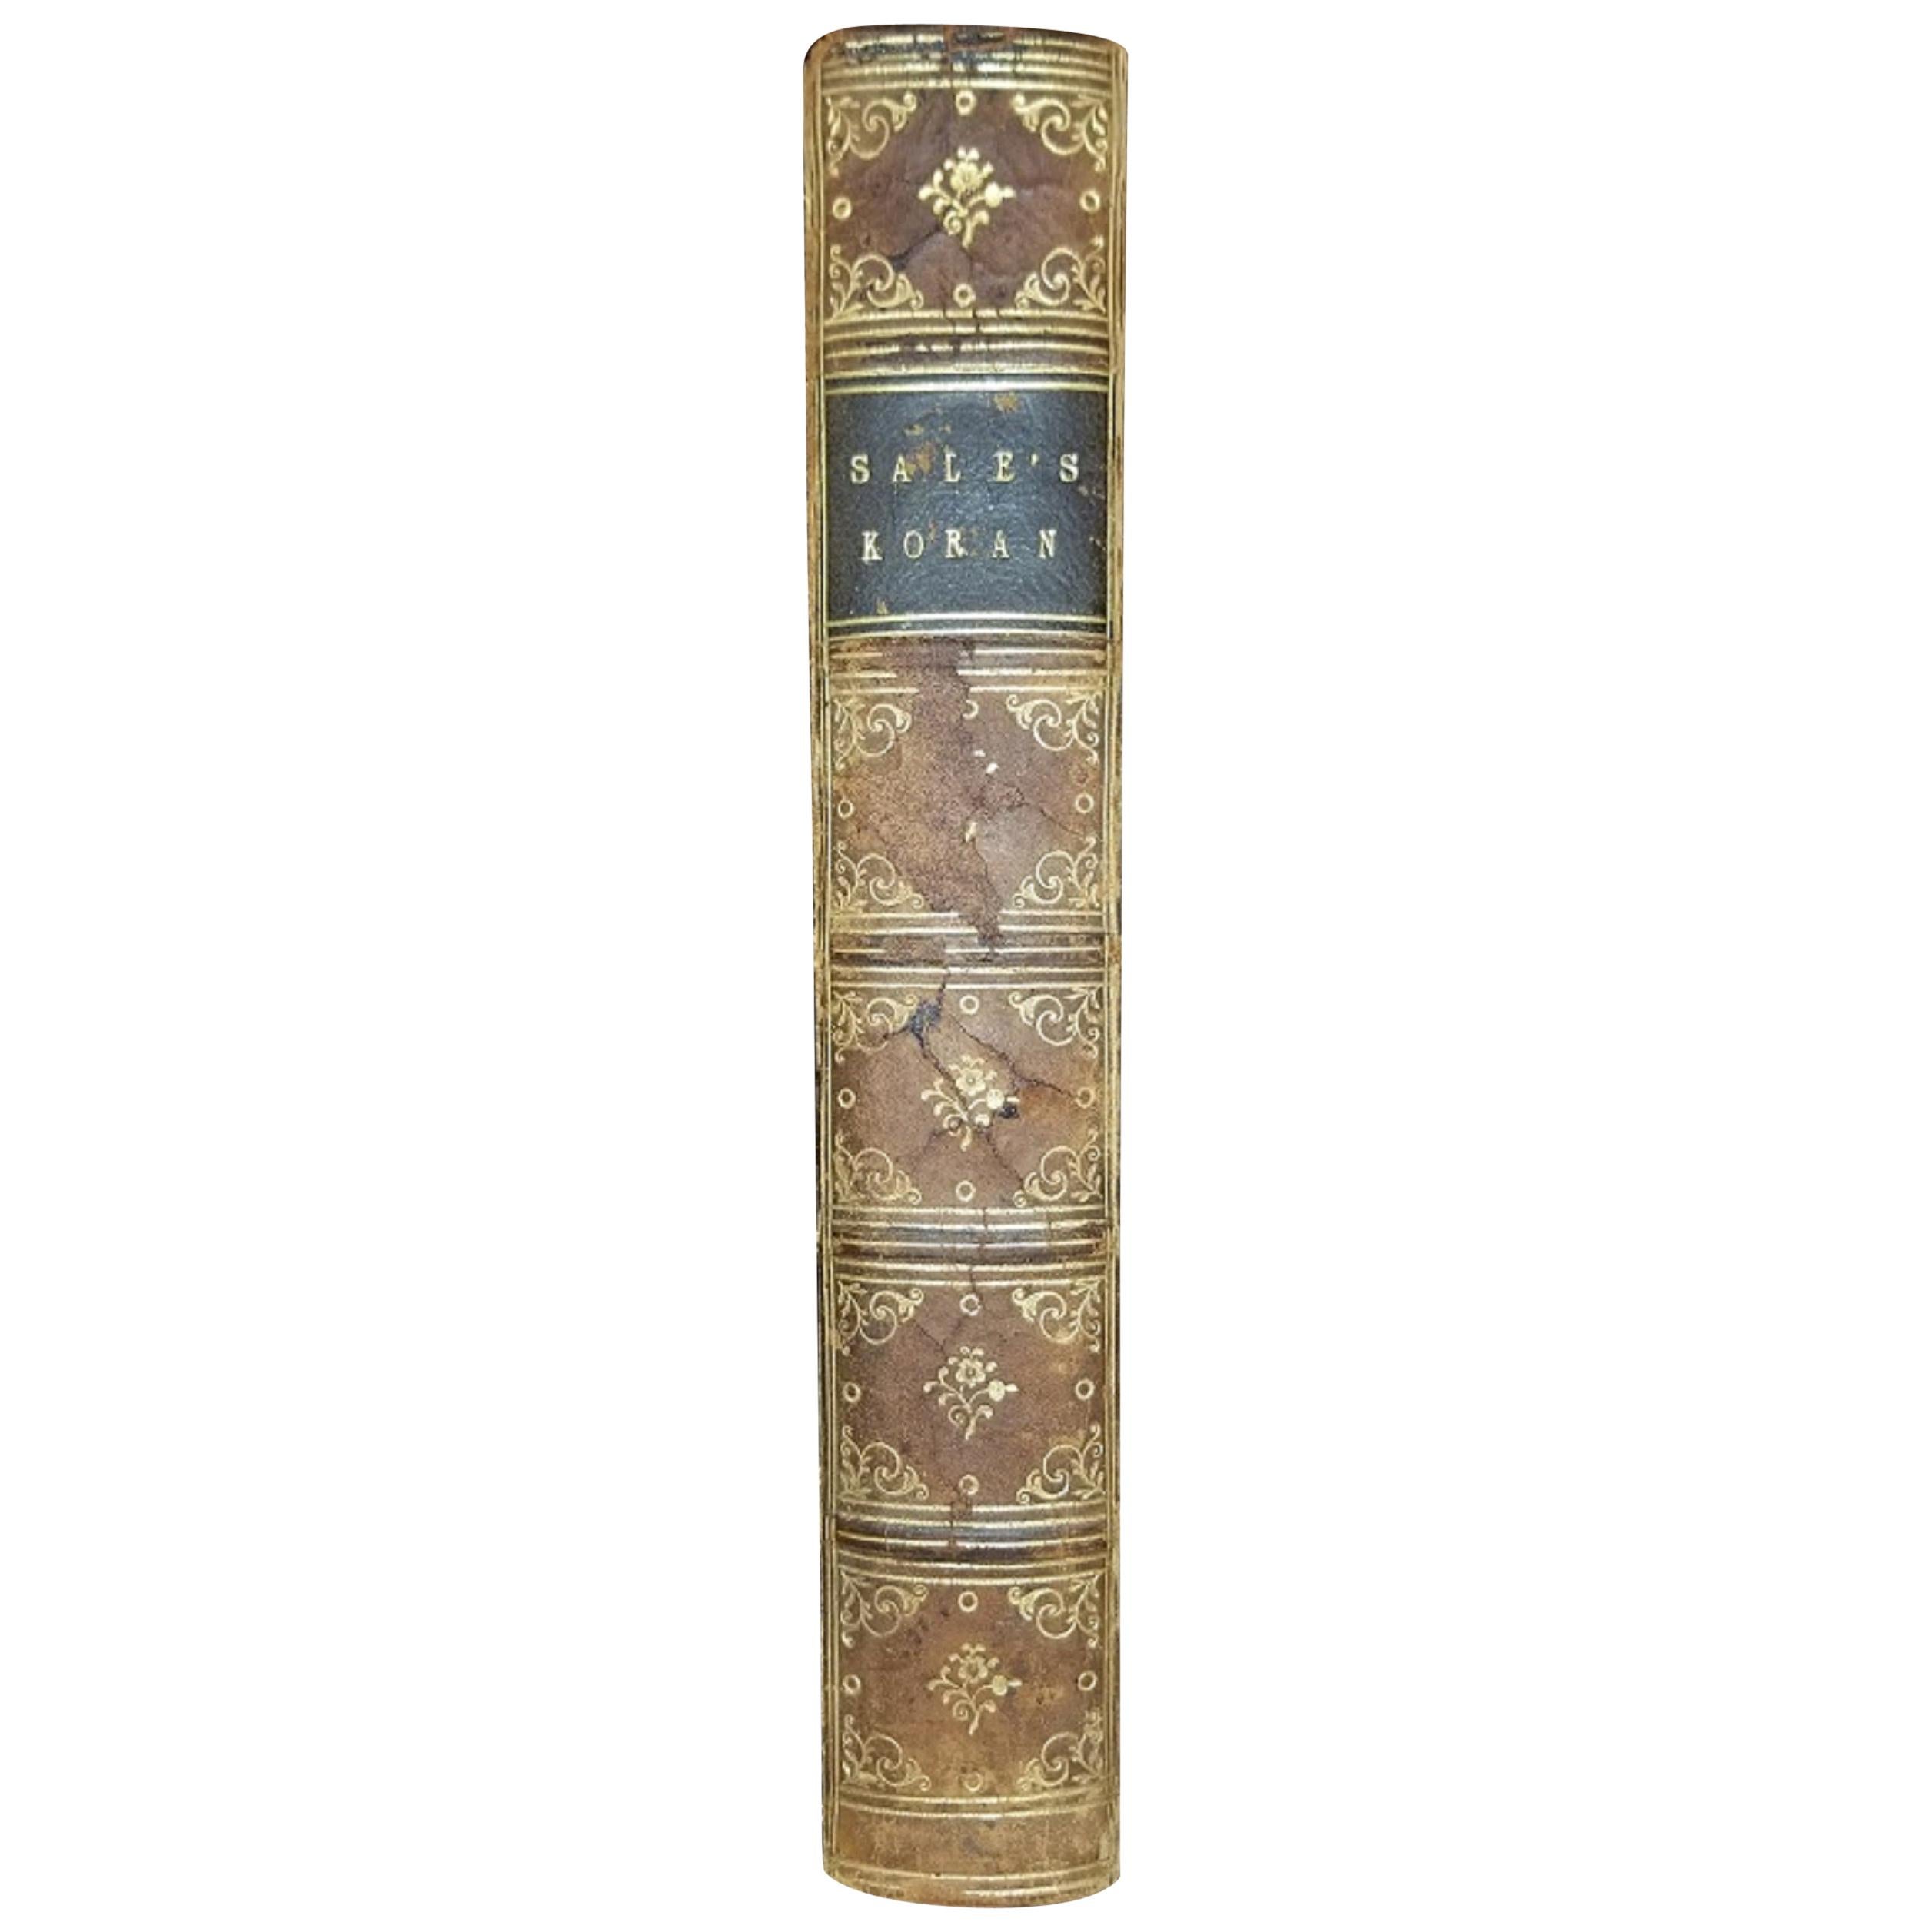 The Koran The Alcoran of Mohammed by George Sale 1844